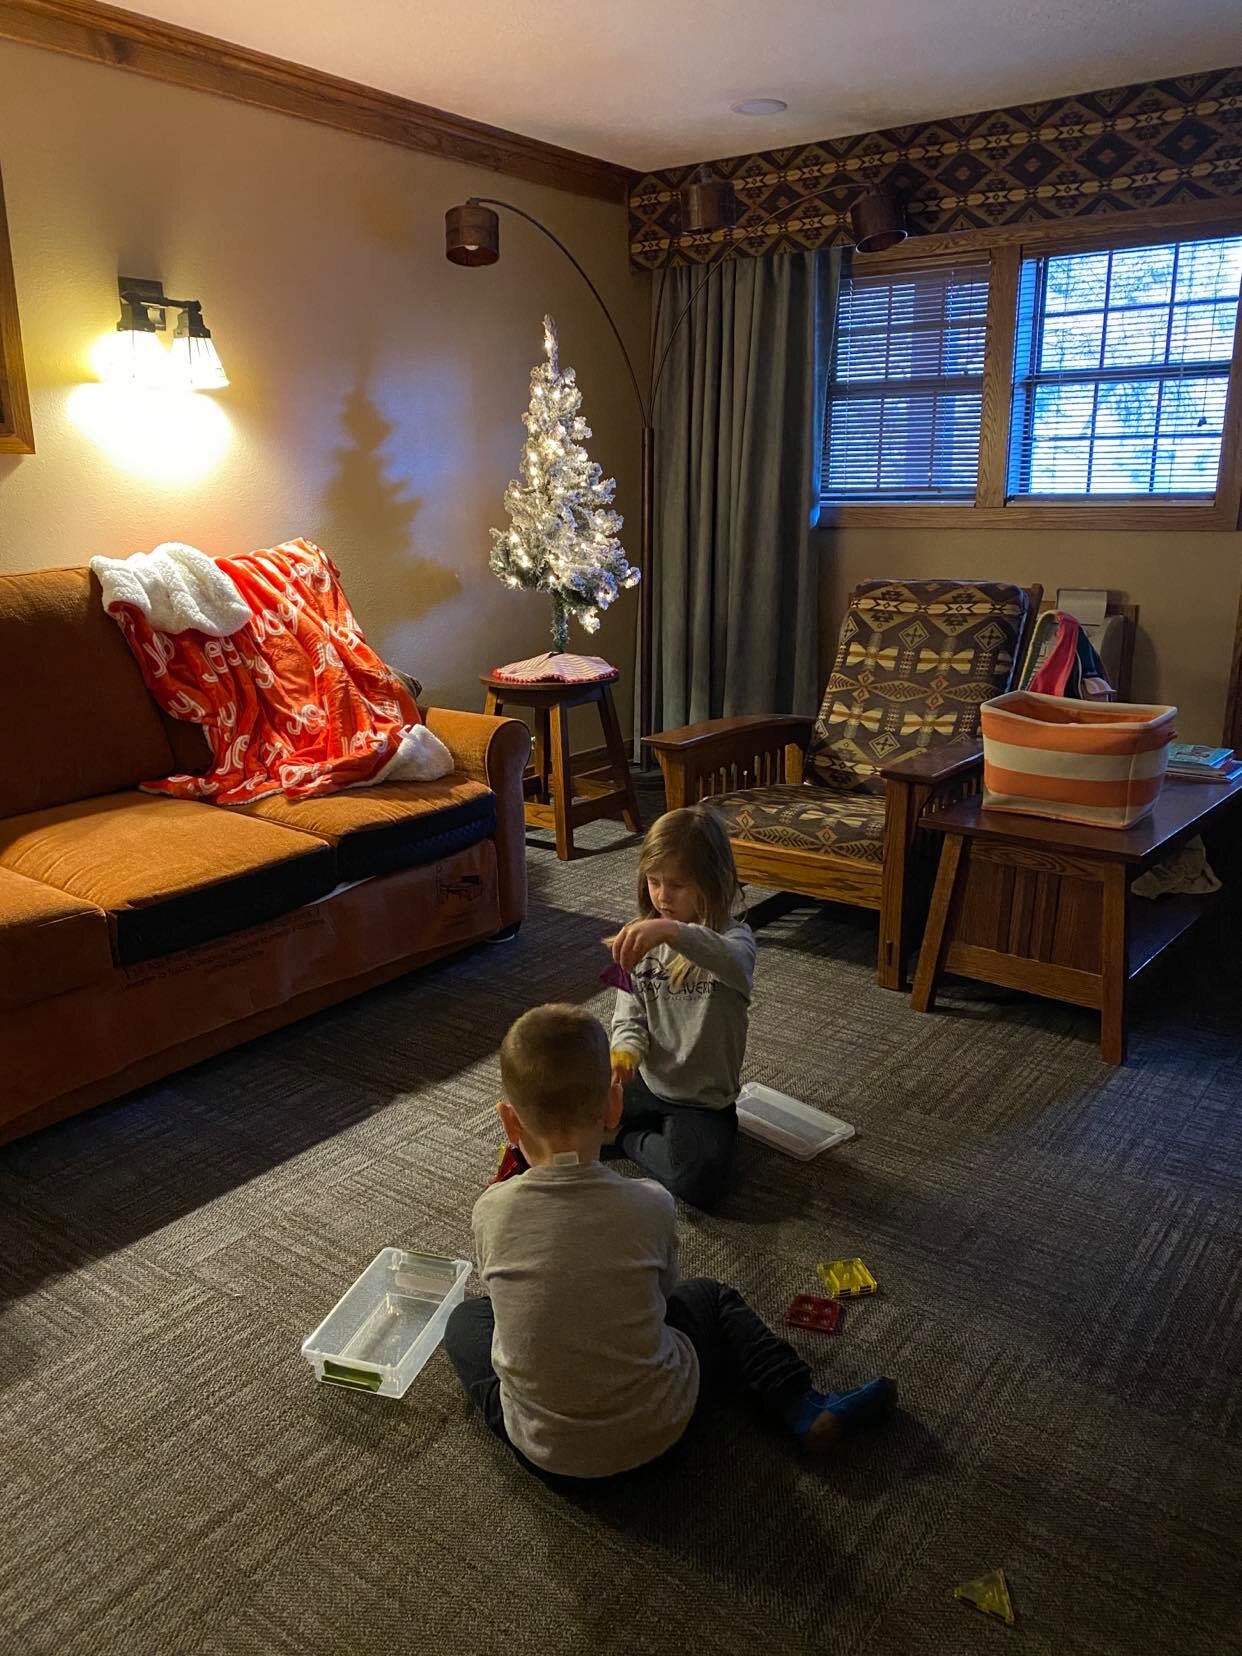 This is the kids playing in the living room of our king suite.  we brought our own christmas tree to make it feel christmasy since it was the week before christmas